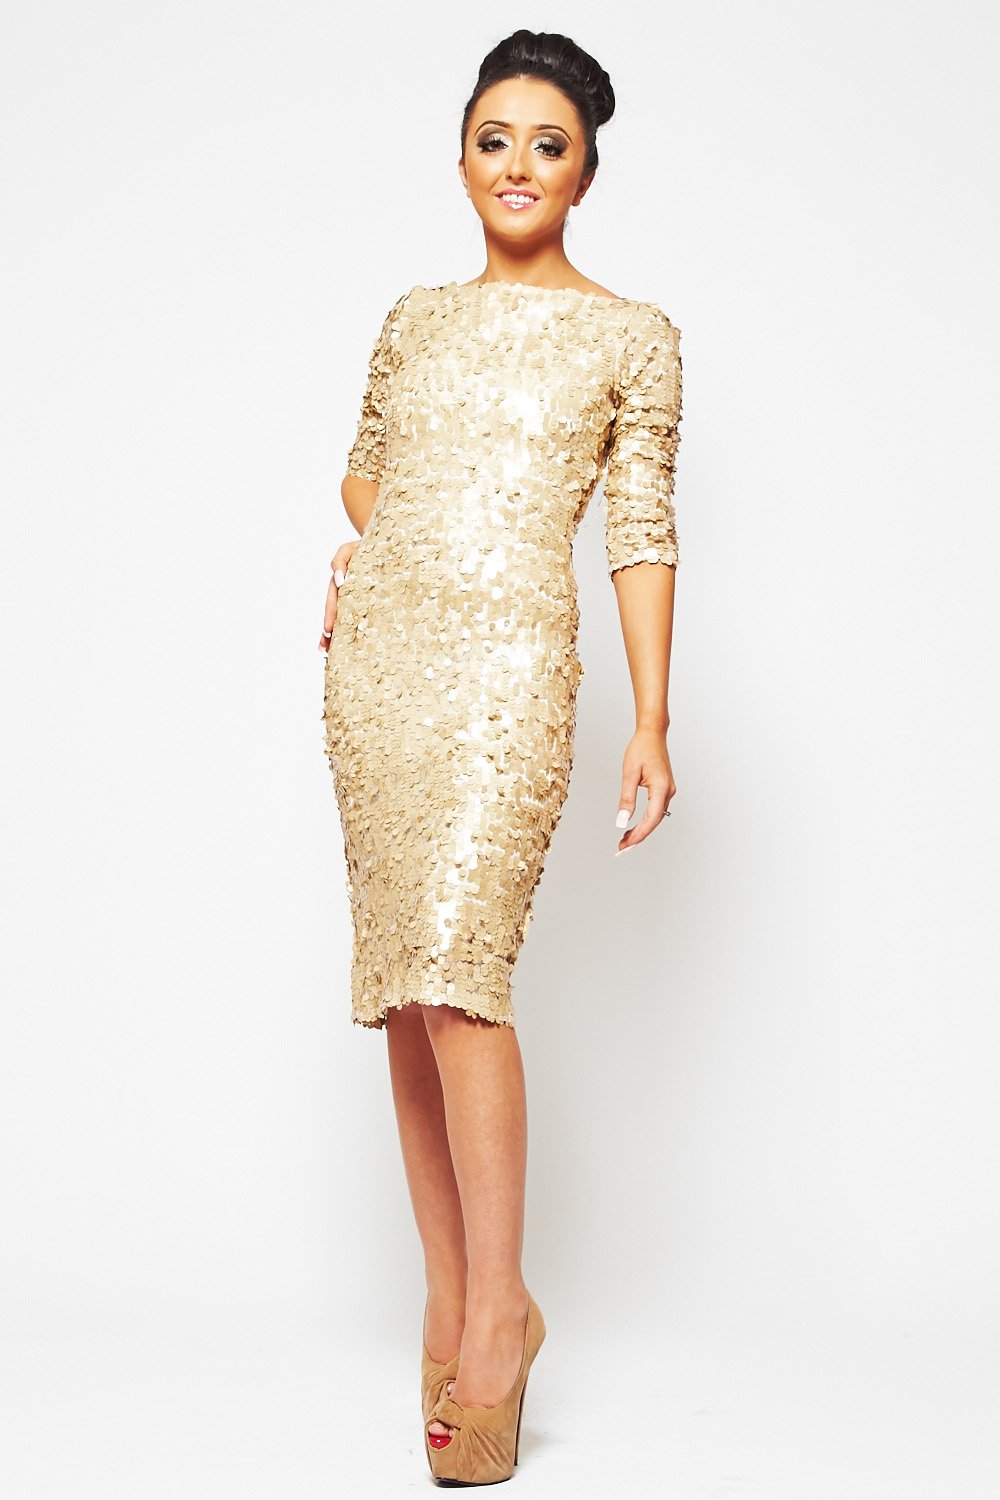 Gold Dress With Sequins And How To Look Good 2017-2018